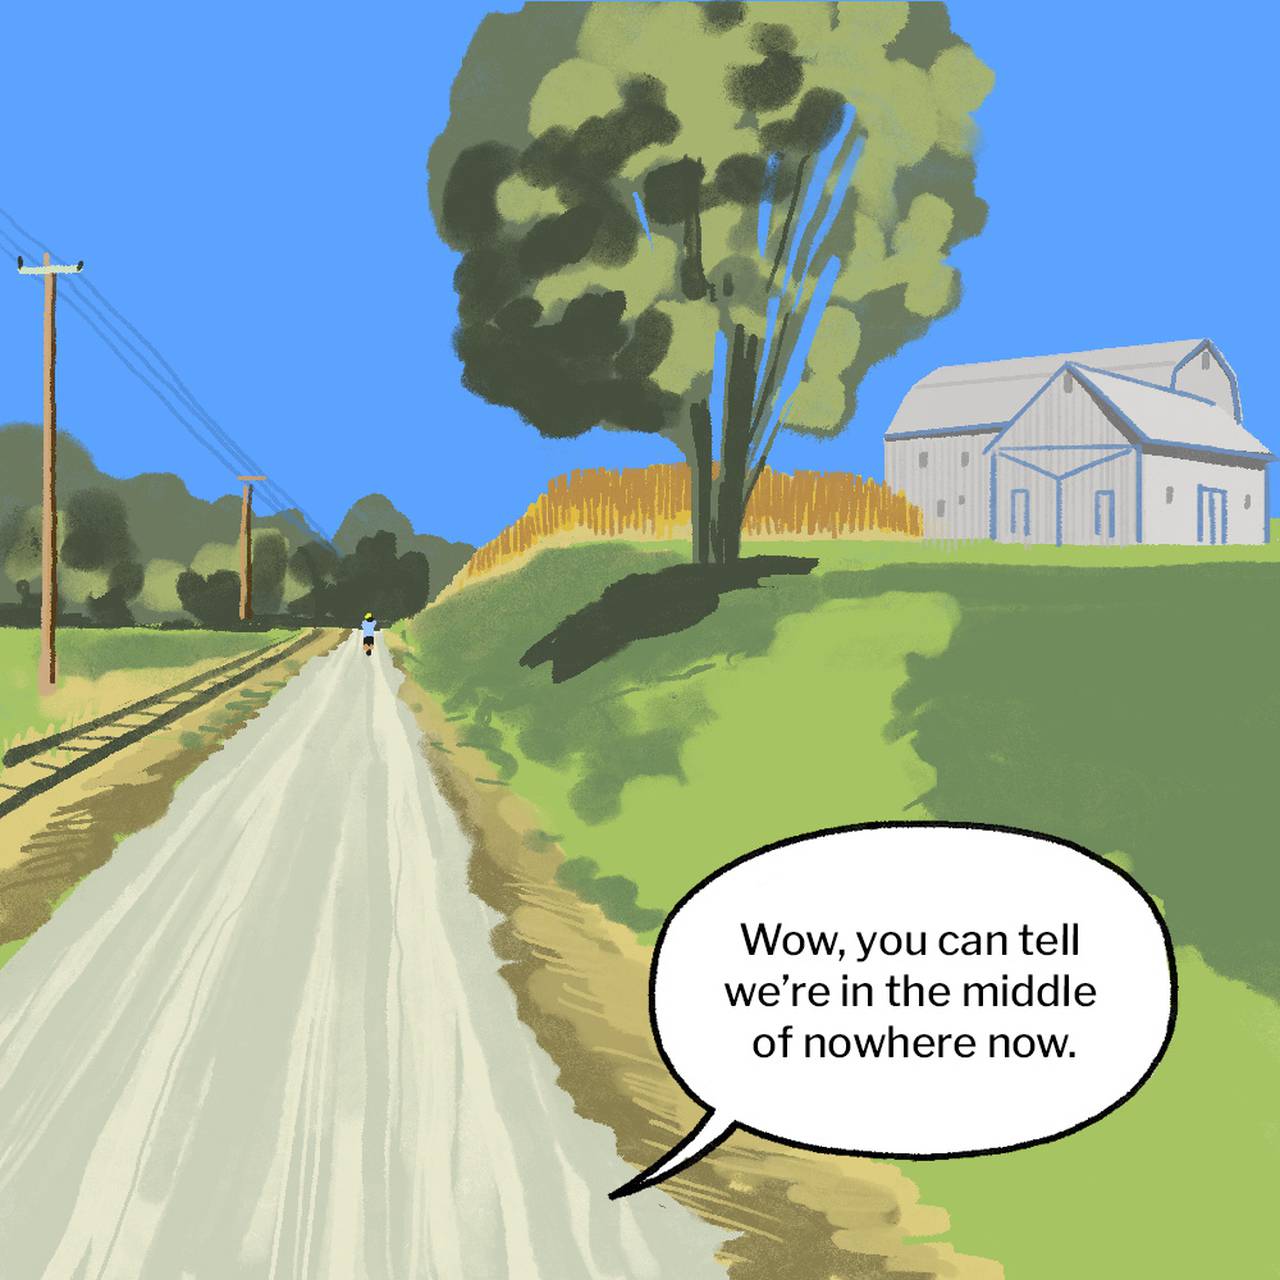 Illustration of the trail receding into the distance with a distant figure of a bicyclist. The sky is bright blue. To the left of the trail is an old railroad track, to the right up the hill is a cornfield and two big gray barns. A speech bubble says: "Wow, you can tell we're in the middle of nowhere now."